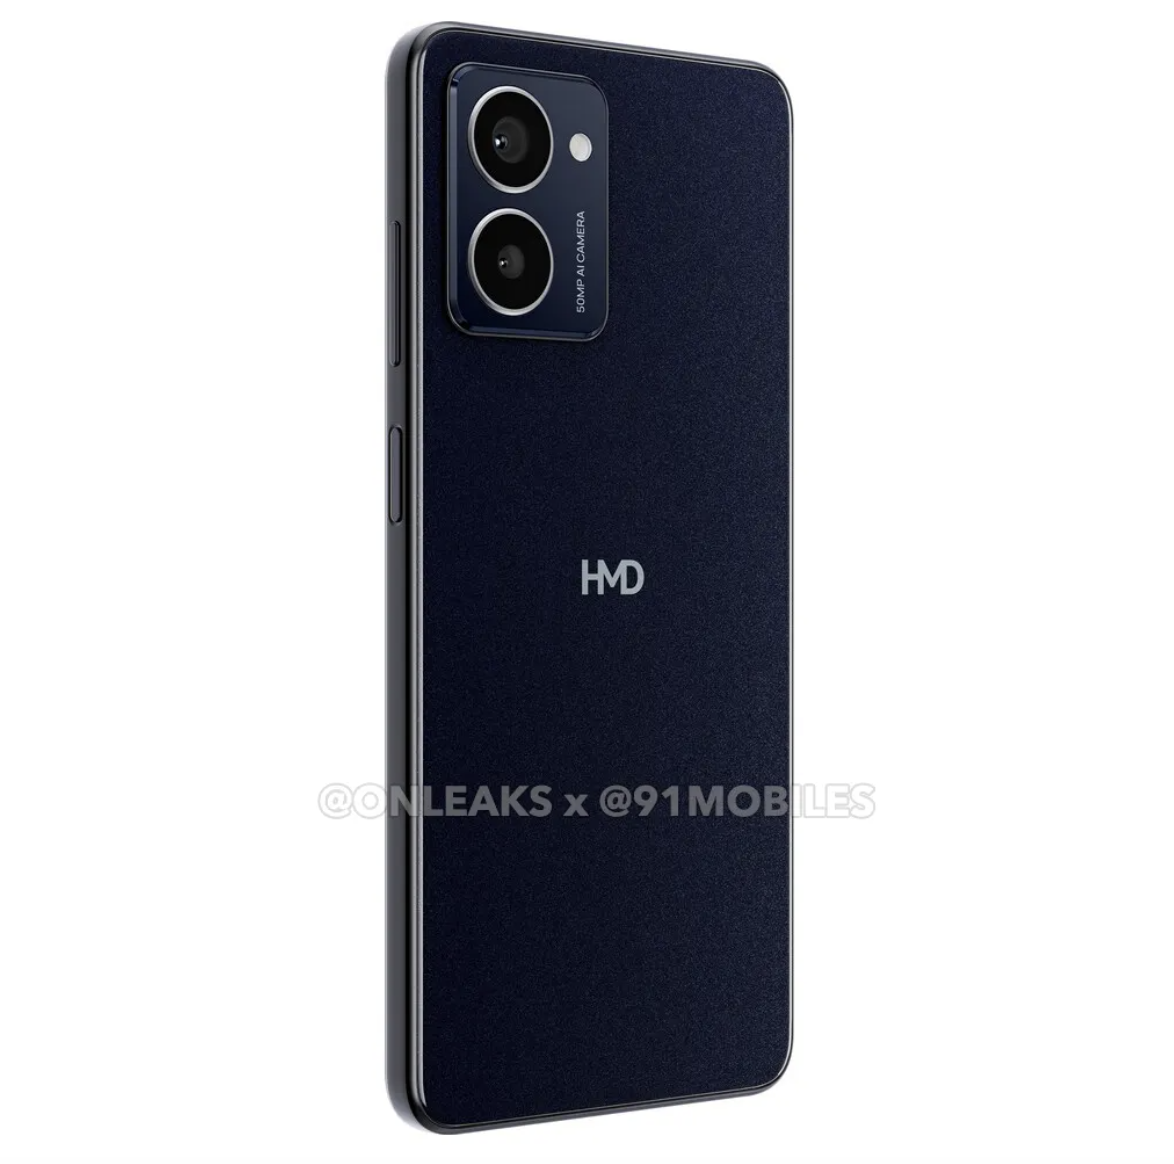 Leaks Reveal New Info about HMD's Upcoming "Pulse Pro" Smartphone